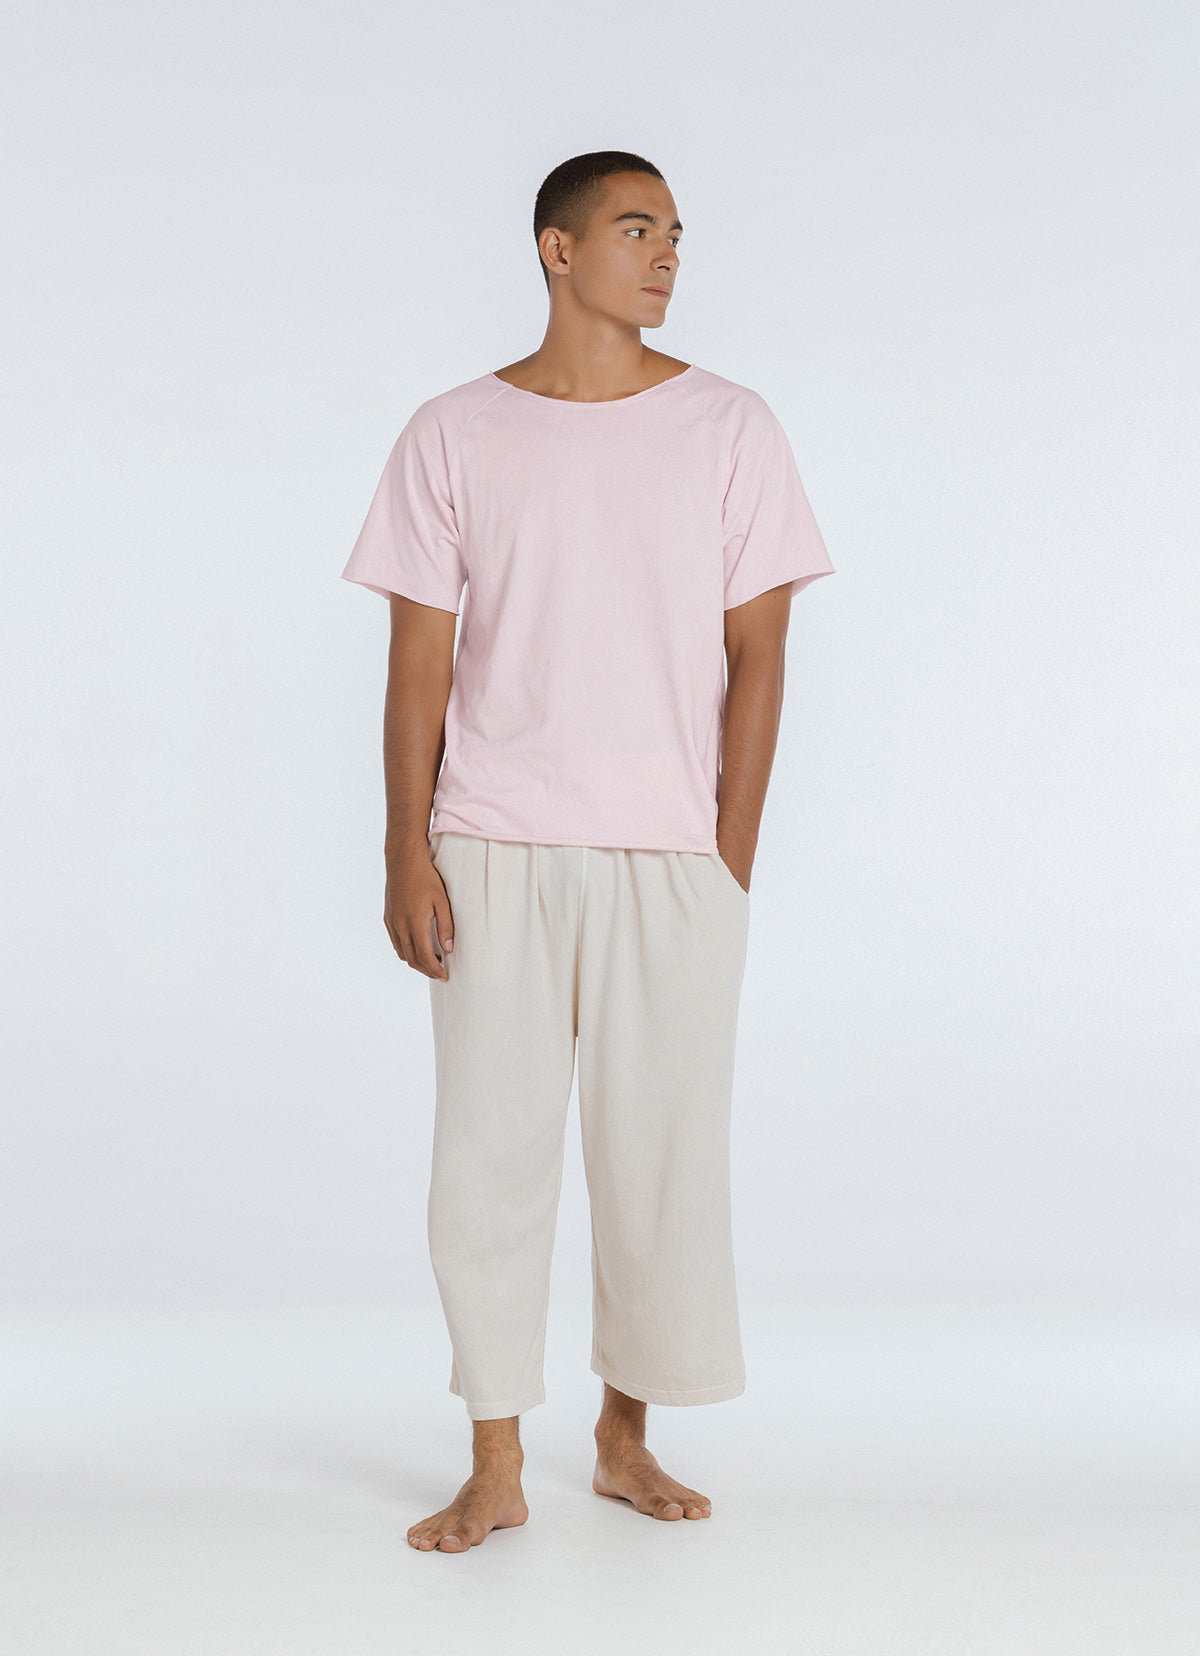 Aman crop pants (For Men)_Oyster White